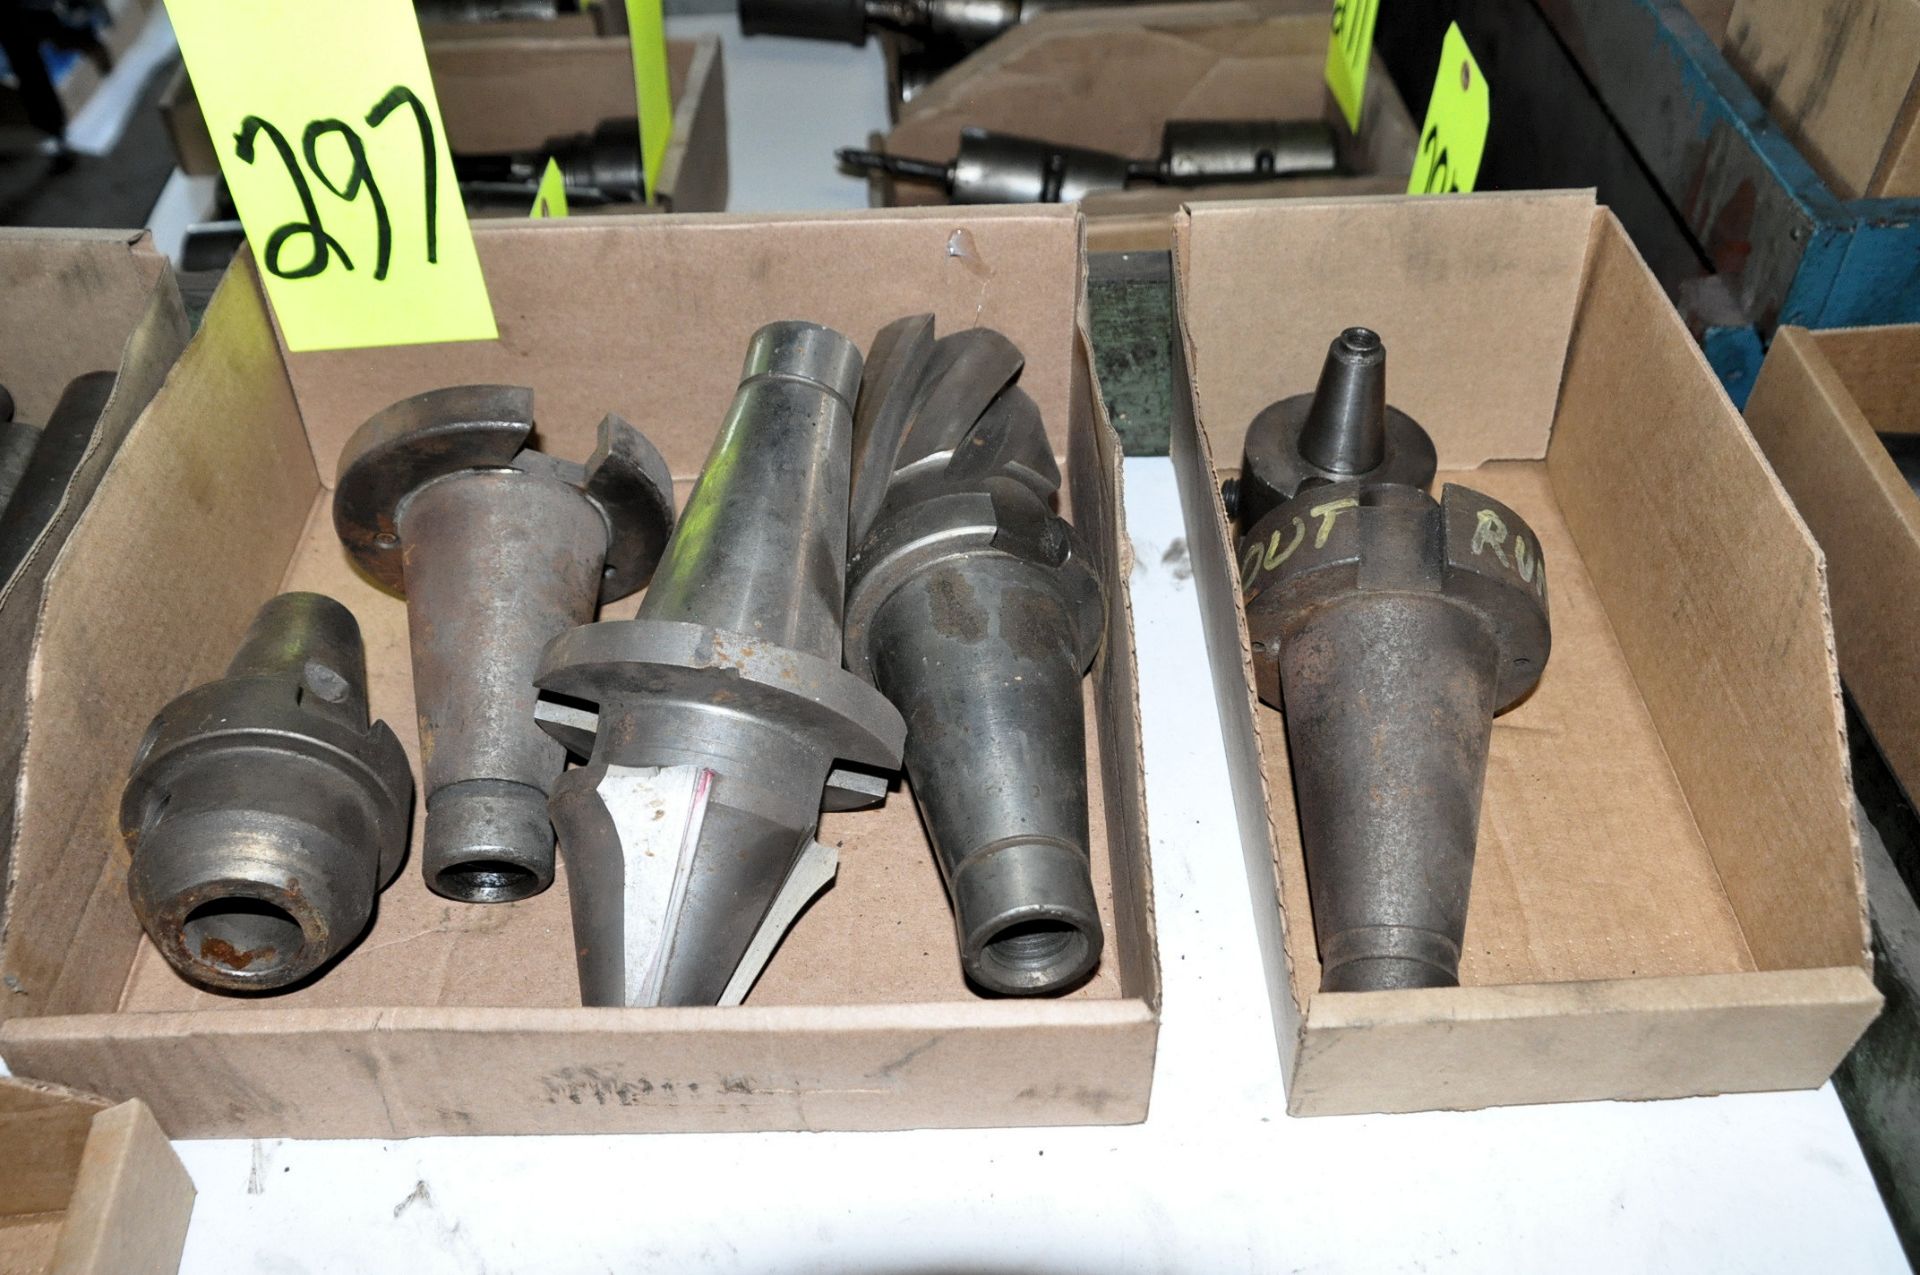 Lot-(4) 50-Taper and (1) 40-Taper Tool Holders in (2) Boxes